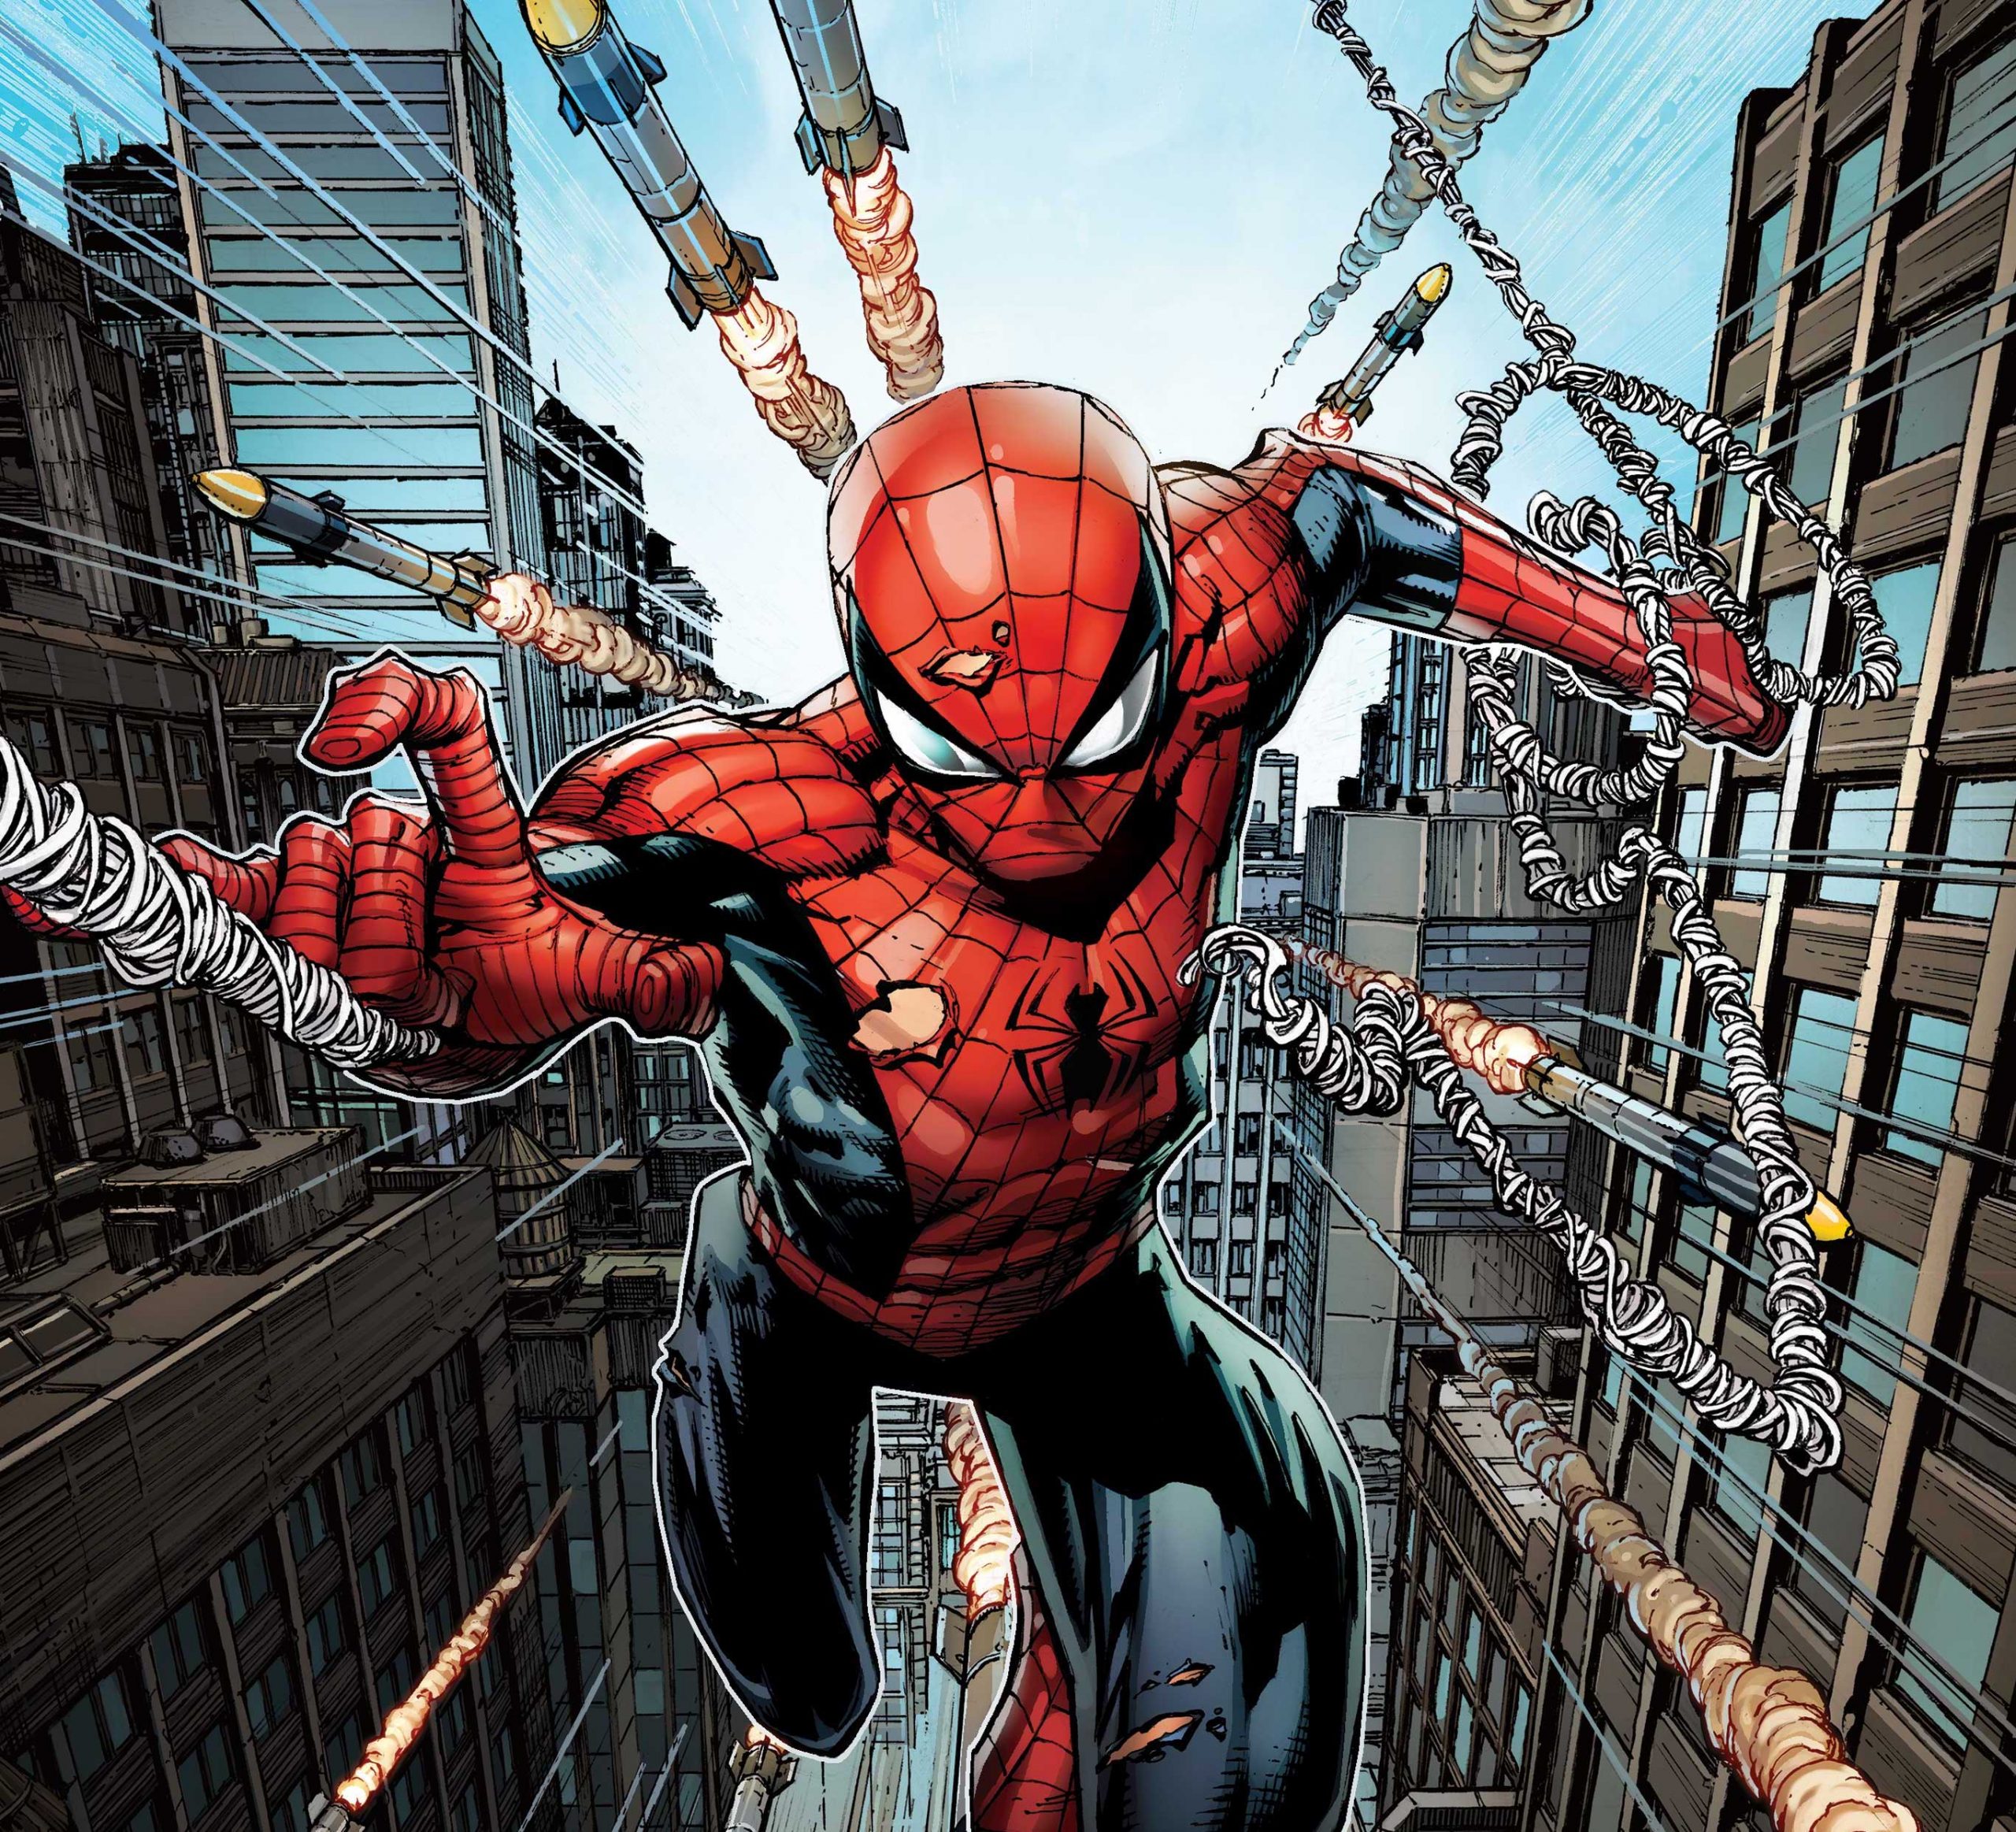 'Non-Stop Spider-Man' #1 is everything you could ask for in a great Spidey comic